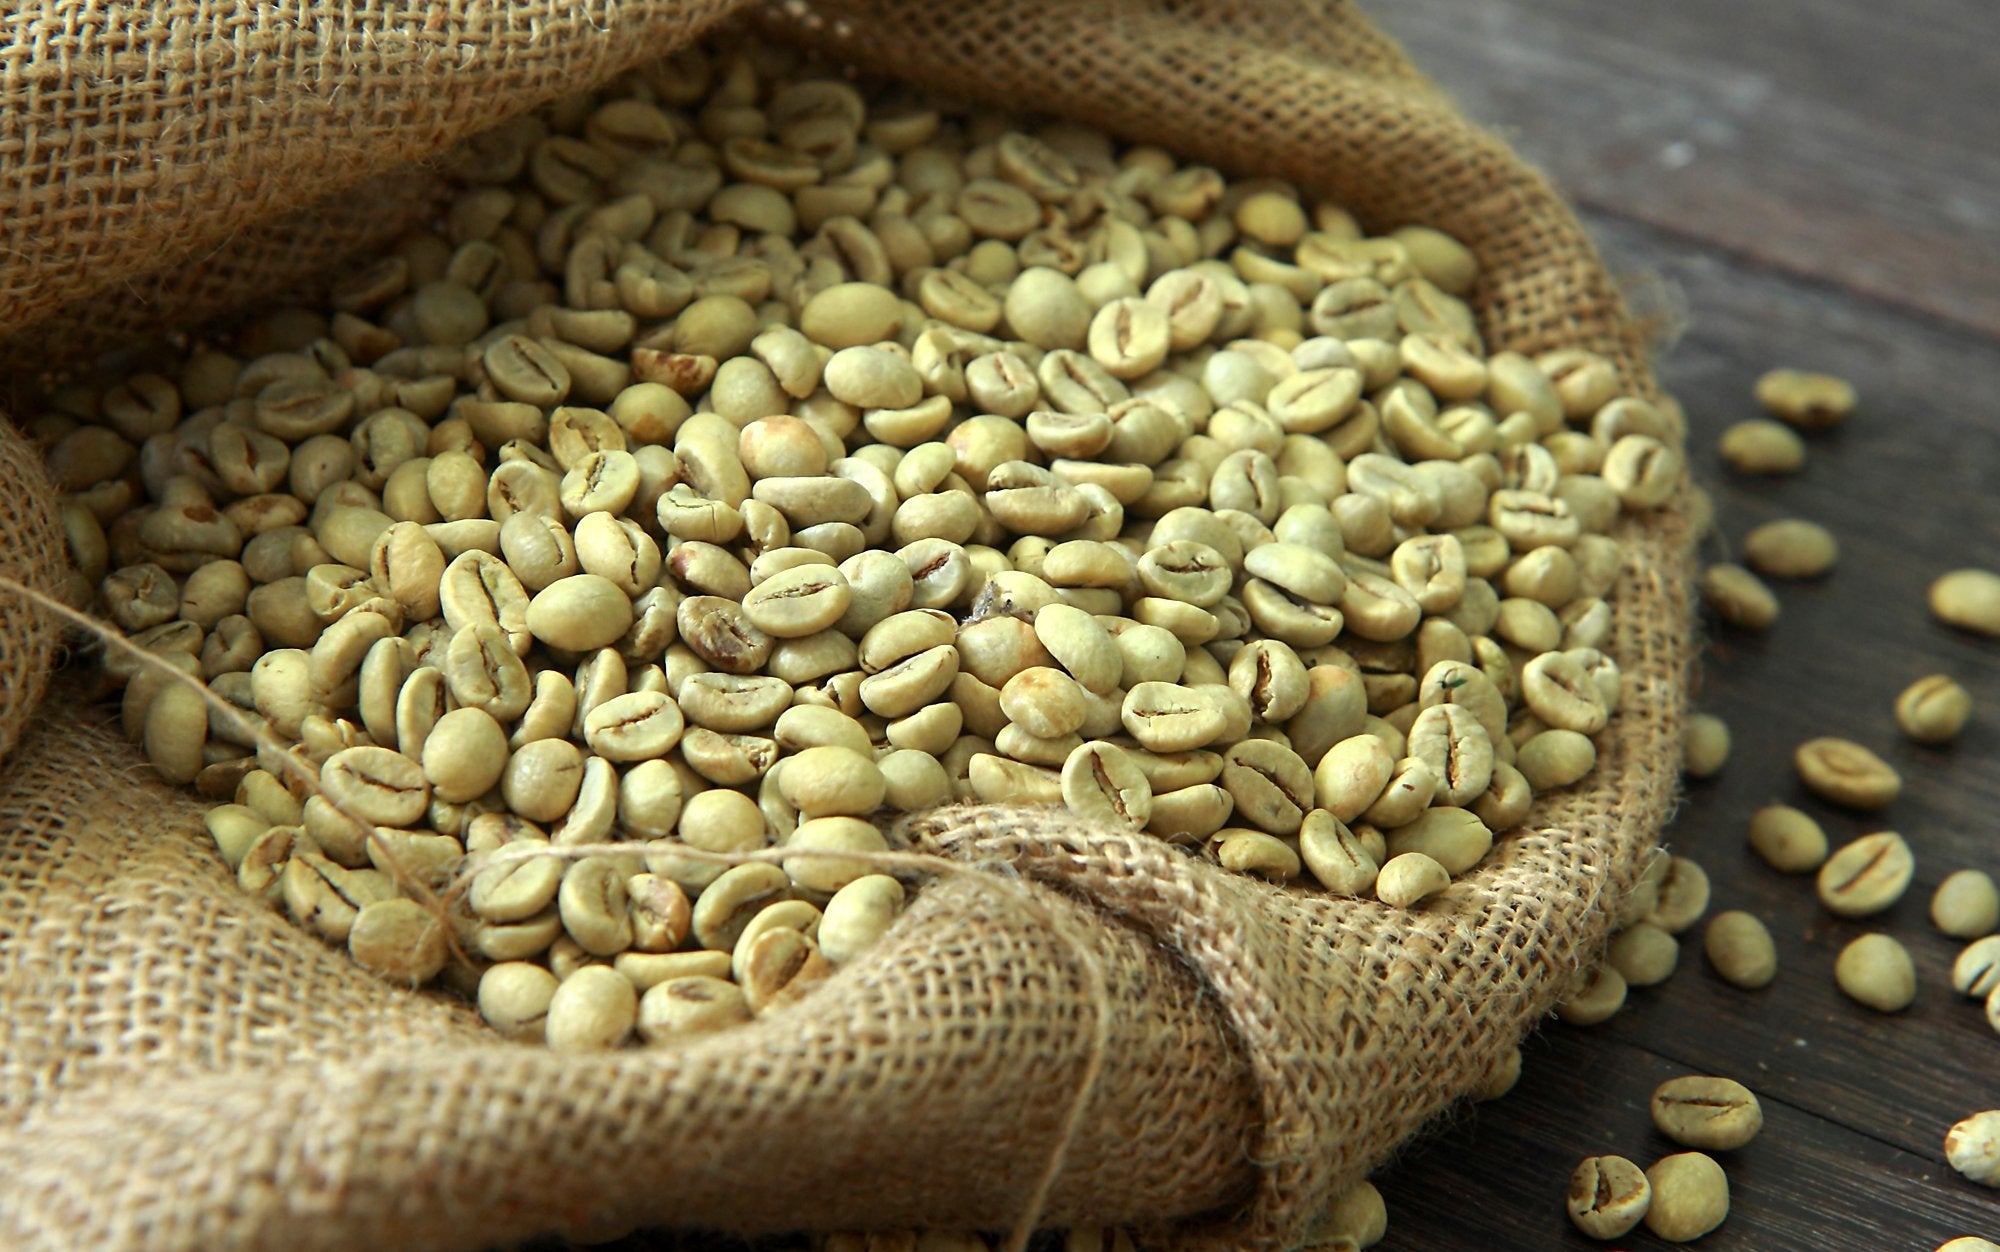 unroasted green coffee beans in a burlap bag